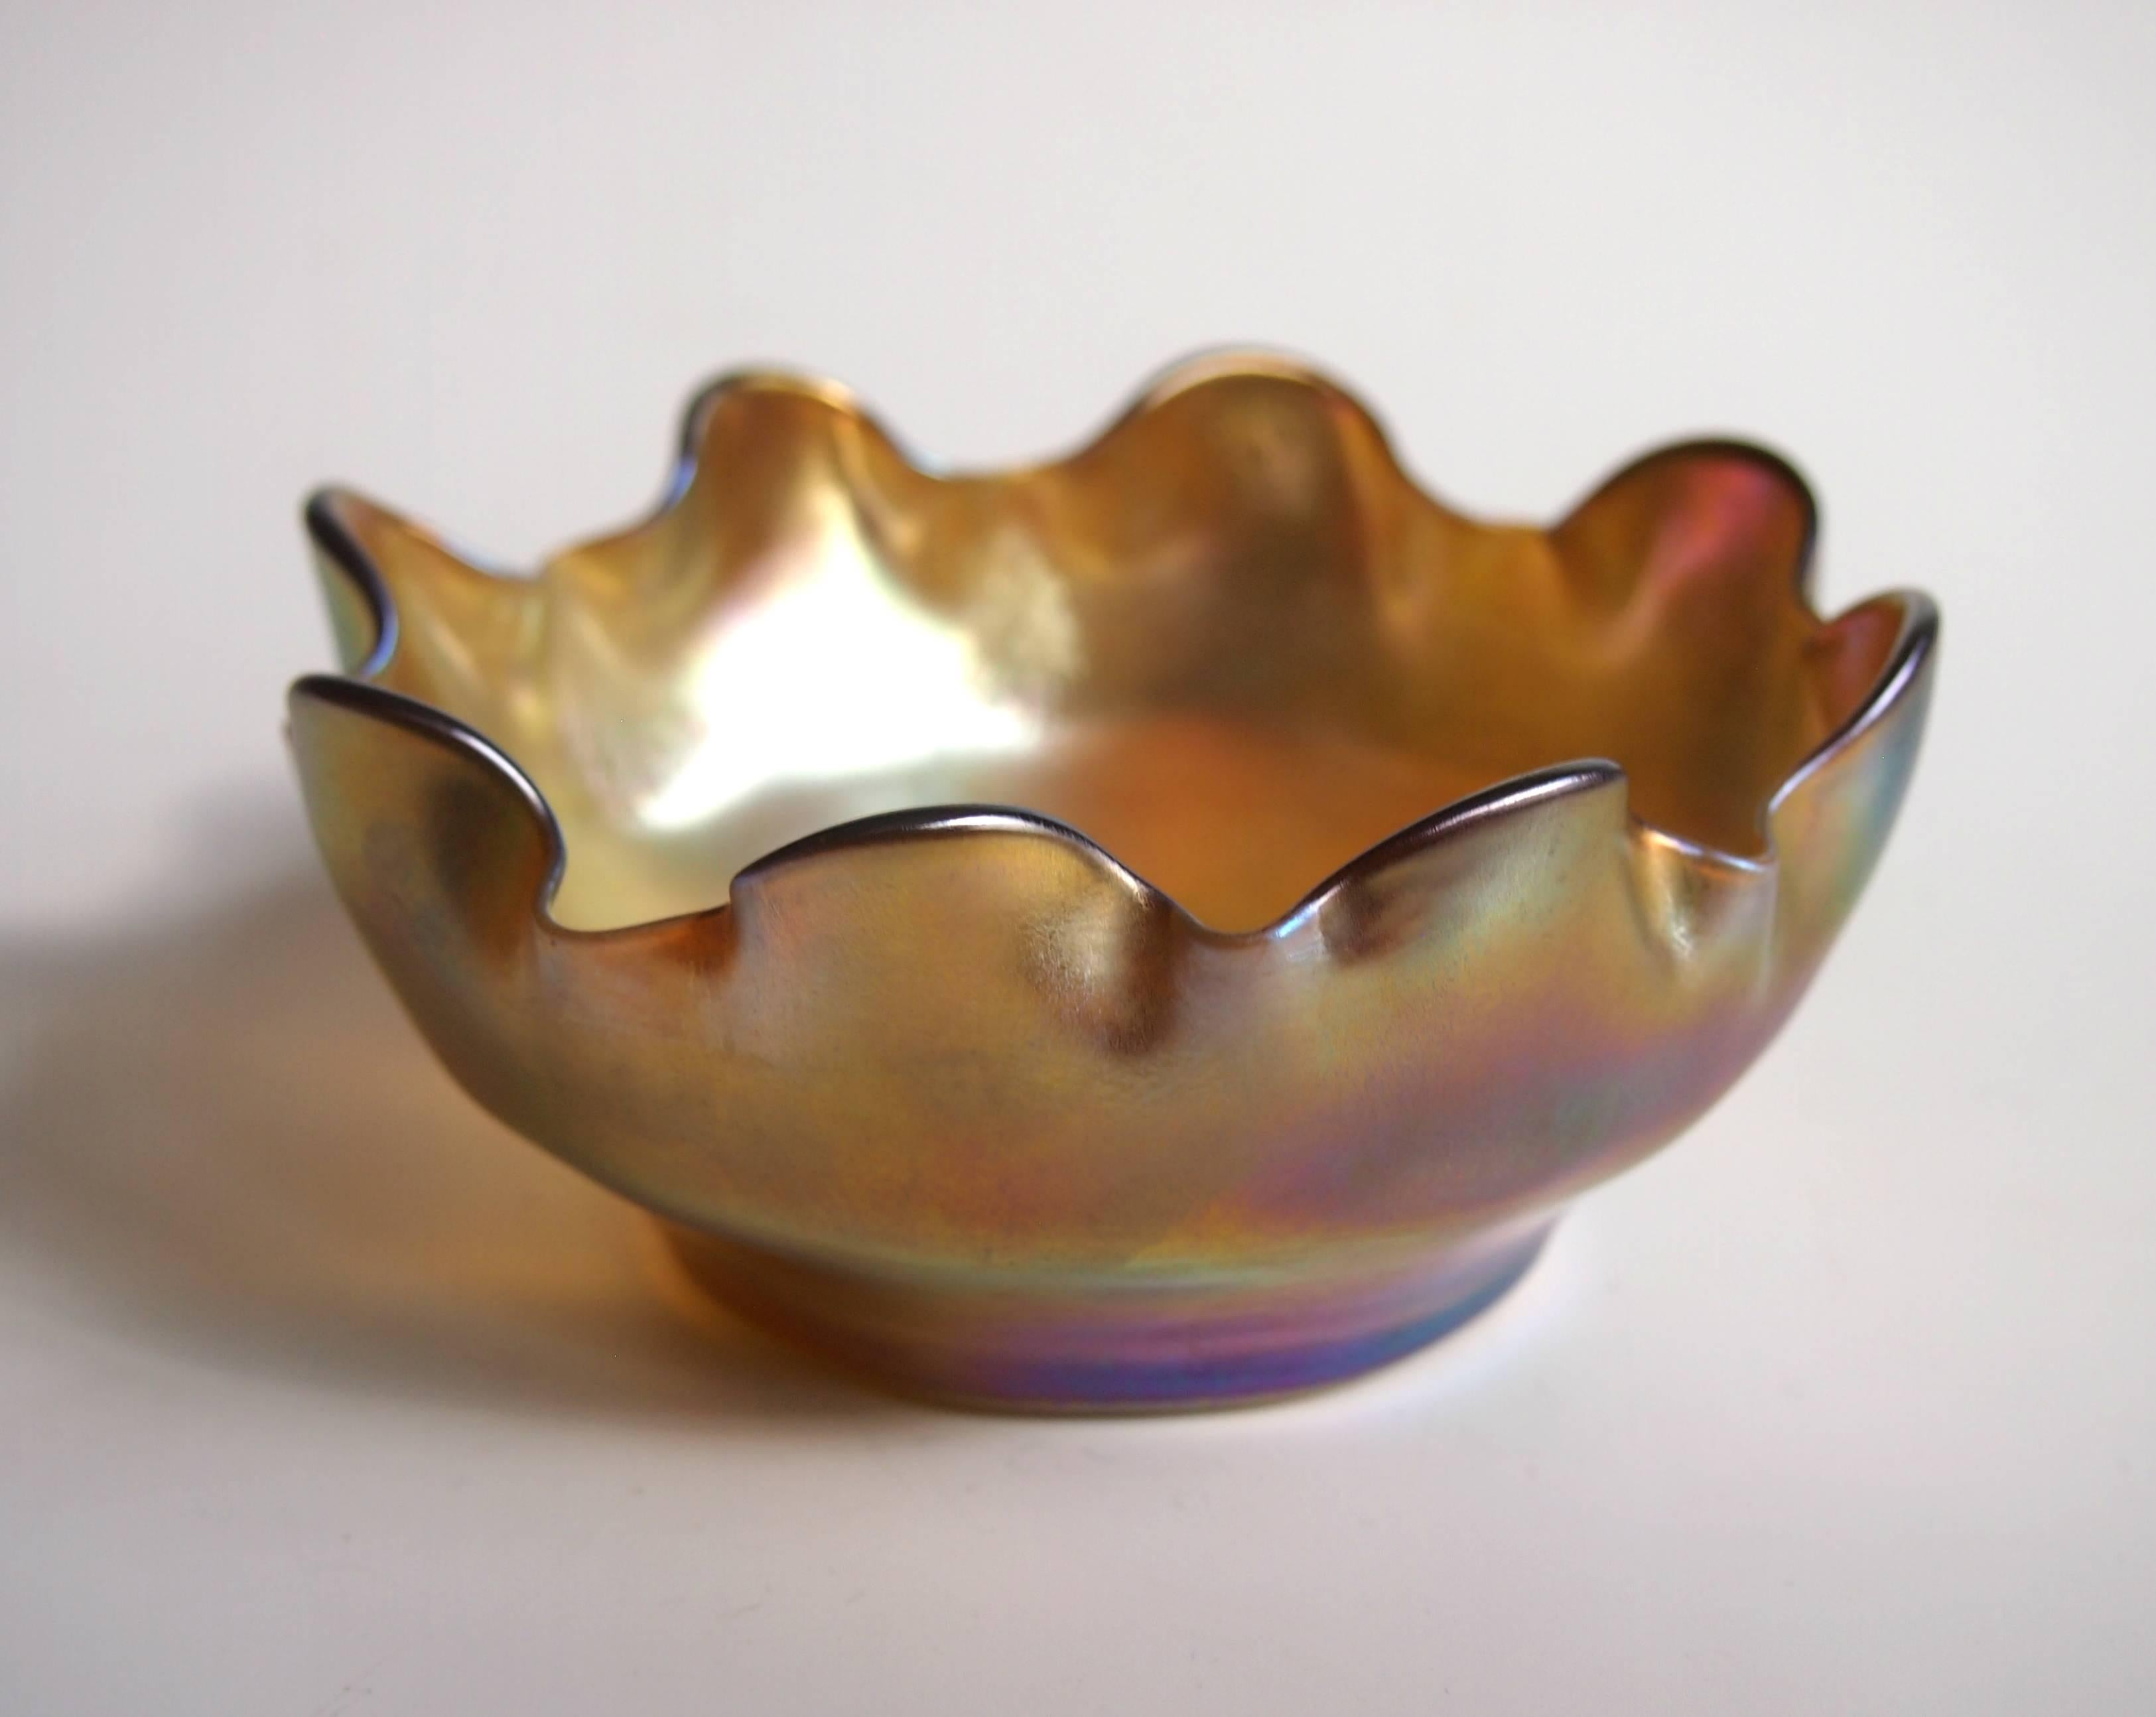 A Fine Art Nouveau Louis comfort Tiffany Favrile finger bowl or dish in the pattern called Queen (Tiffany booklet 1905). It has super light shaded gold with iridescent lustre and highlights of yellow, pink, blue and green. Signed L. C. T. to the